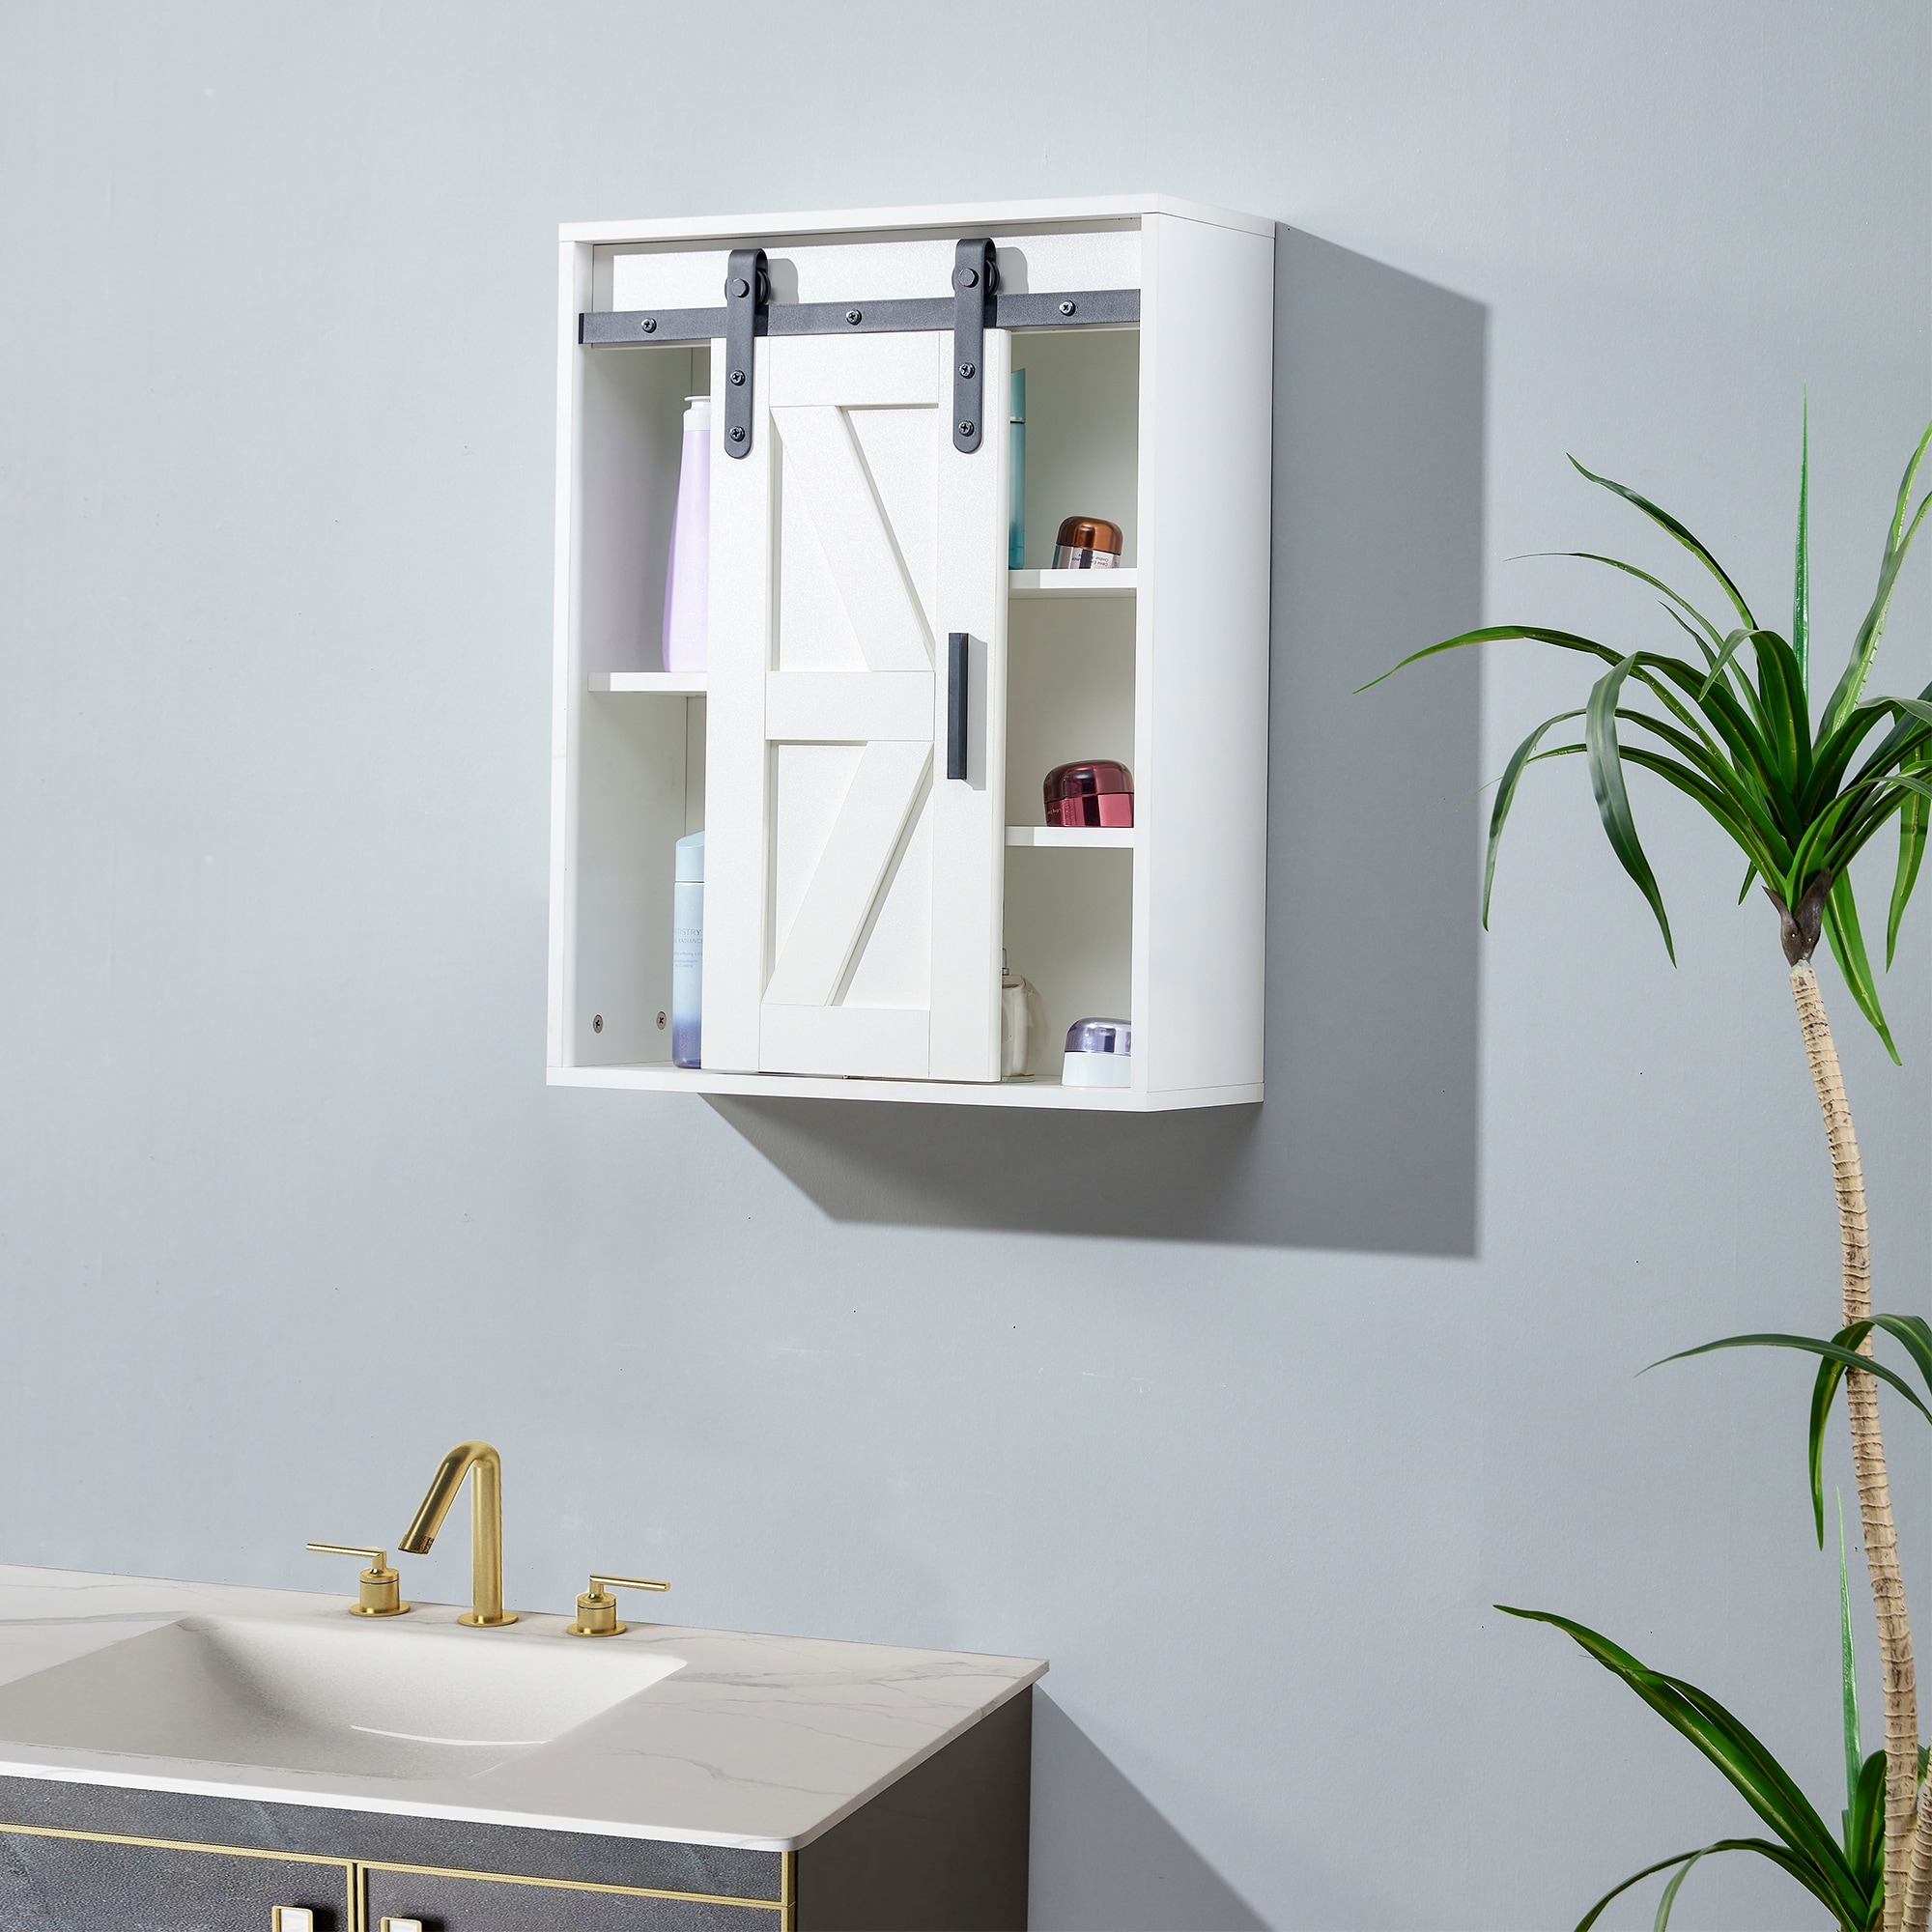 https://ak1.ostkcdn.com/images/products/is/images/direct/fda2fdc748aa9ab38a36e18391b3f250f70b30b1/Wood-Bathroom-Wall-mounted-Storage-Cabinet-with-Adjustable-Door.jpg